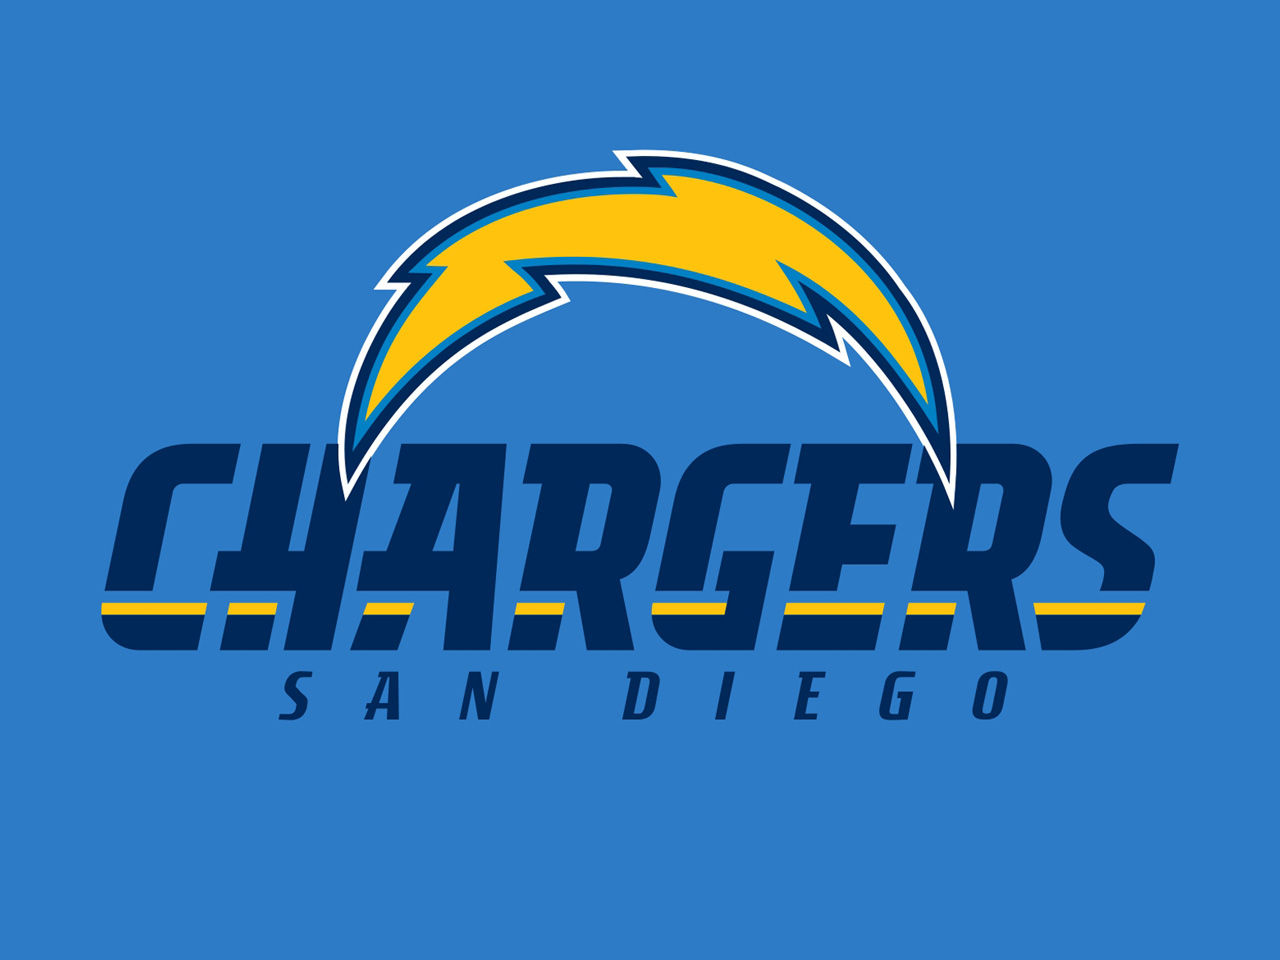 Chargers wallpaper | 1280x960 | #69206